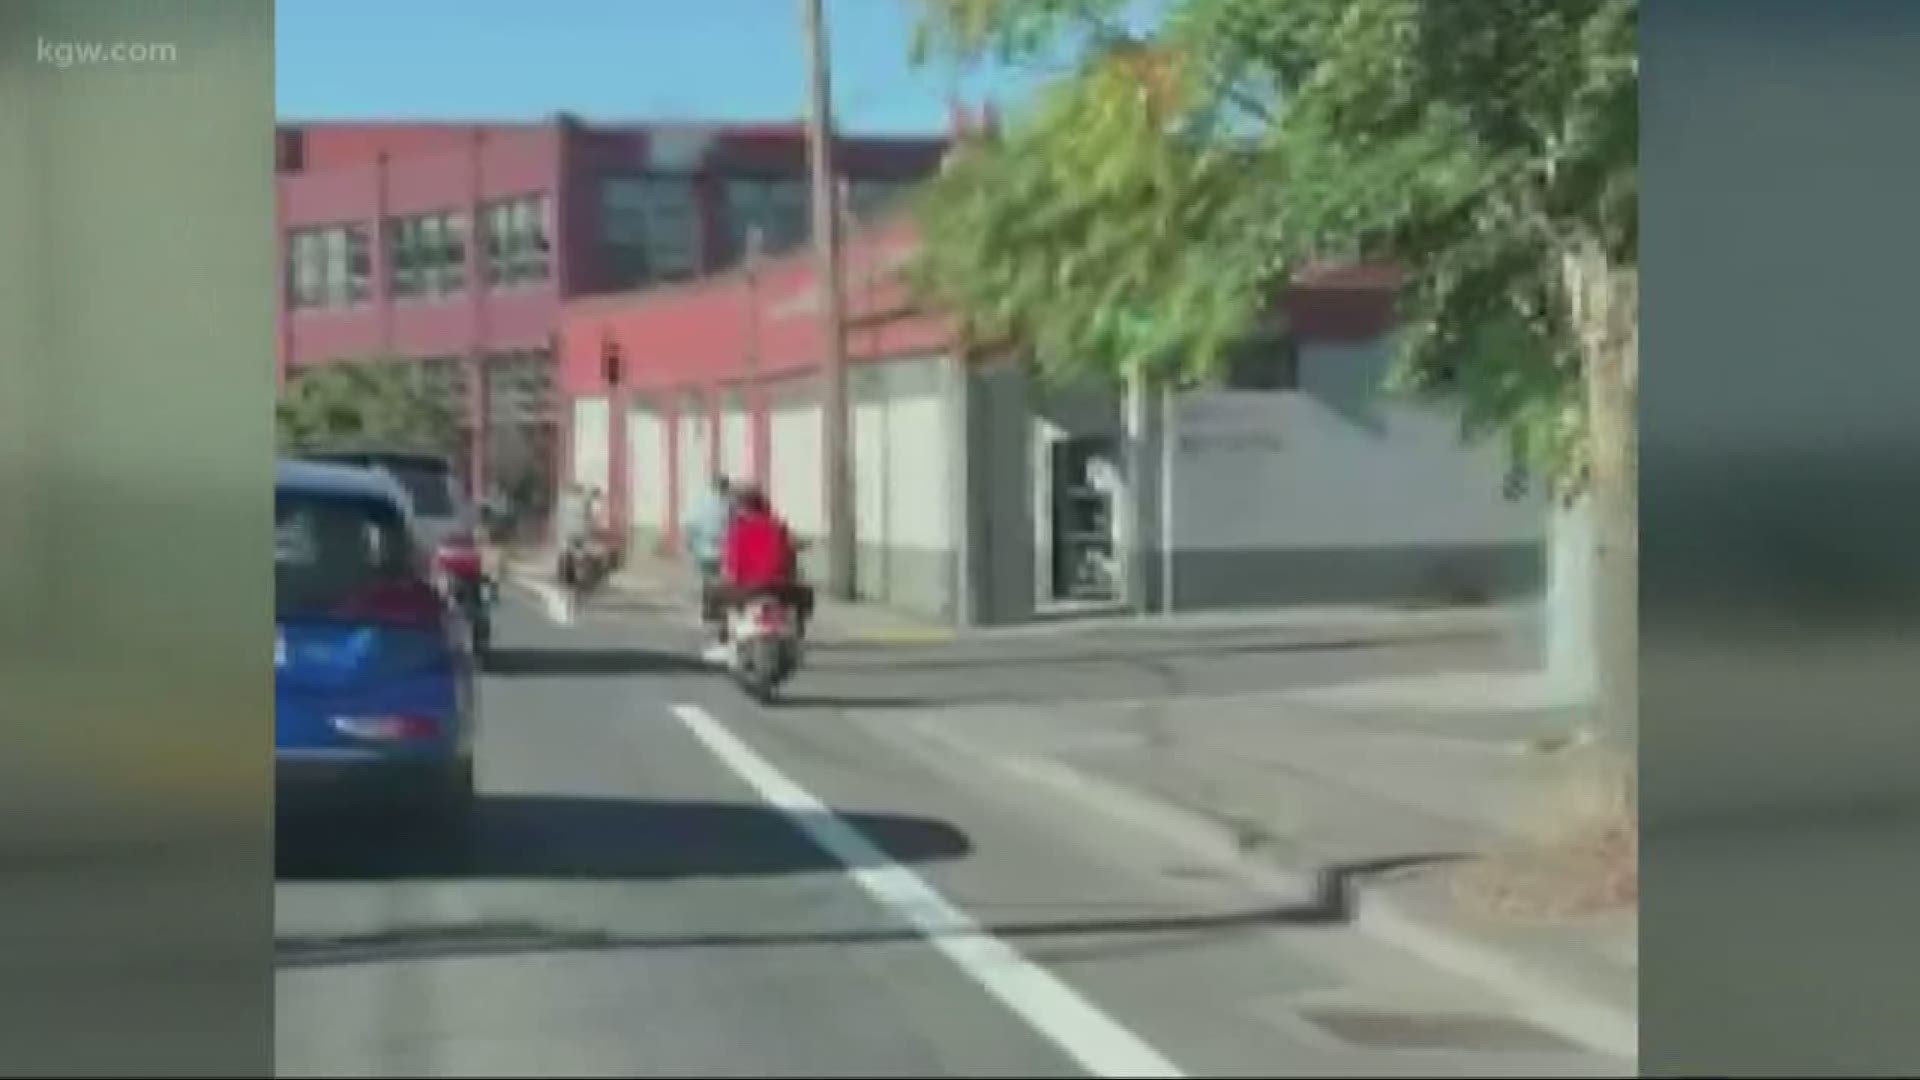 Viewer Julie Brun submitted this video of a motorcycle using a bike lane on North Interstate Avenue in Portland, Oregon.